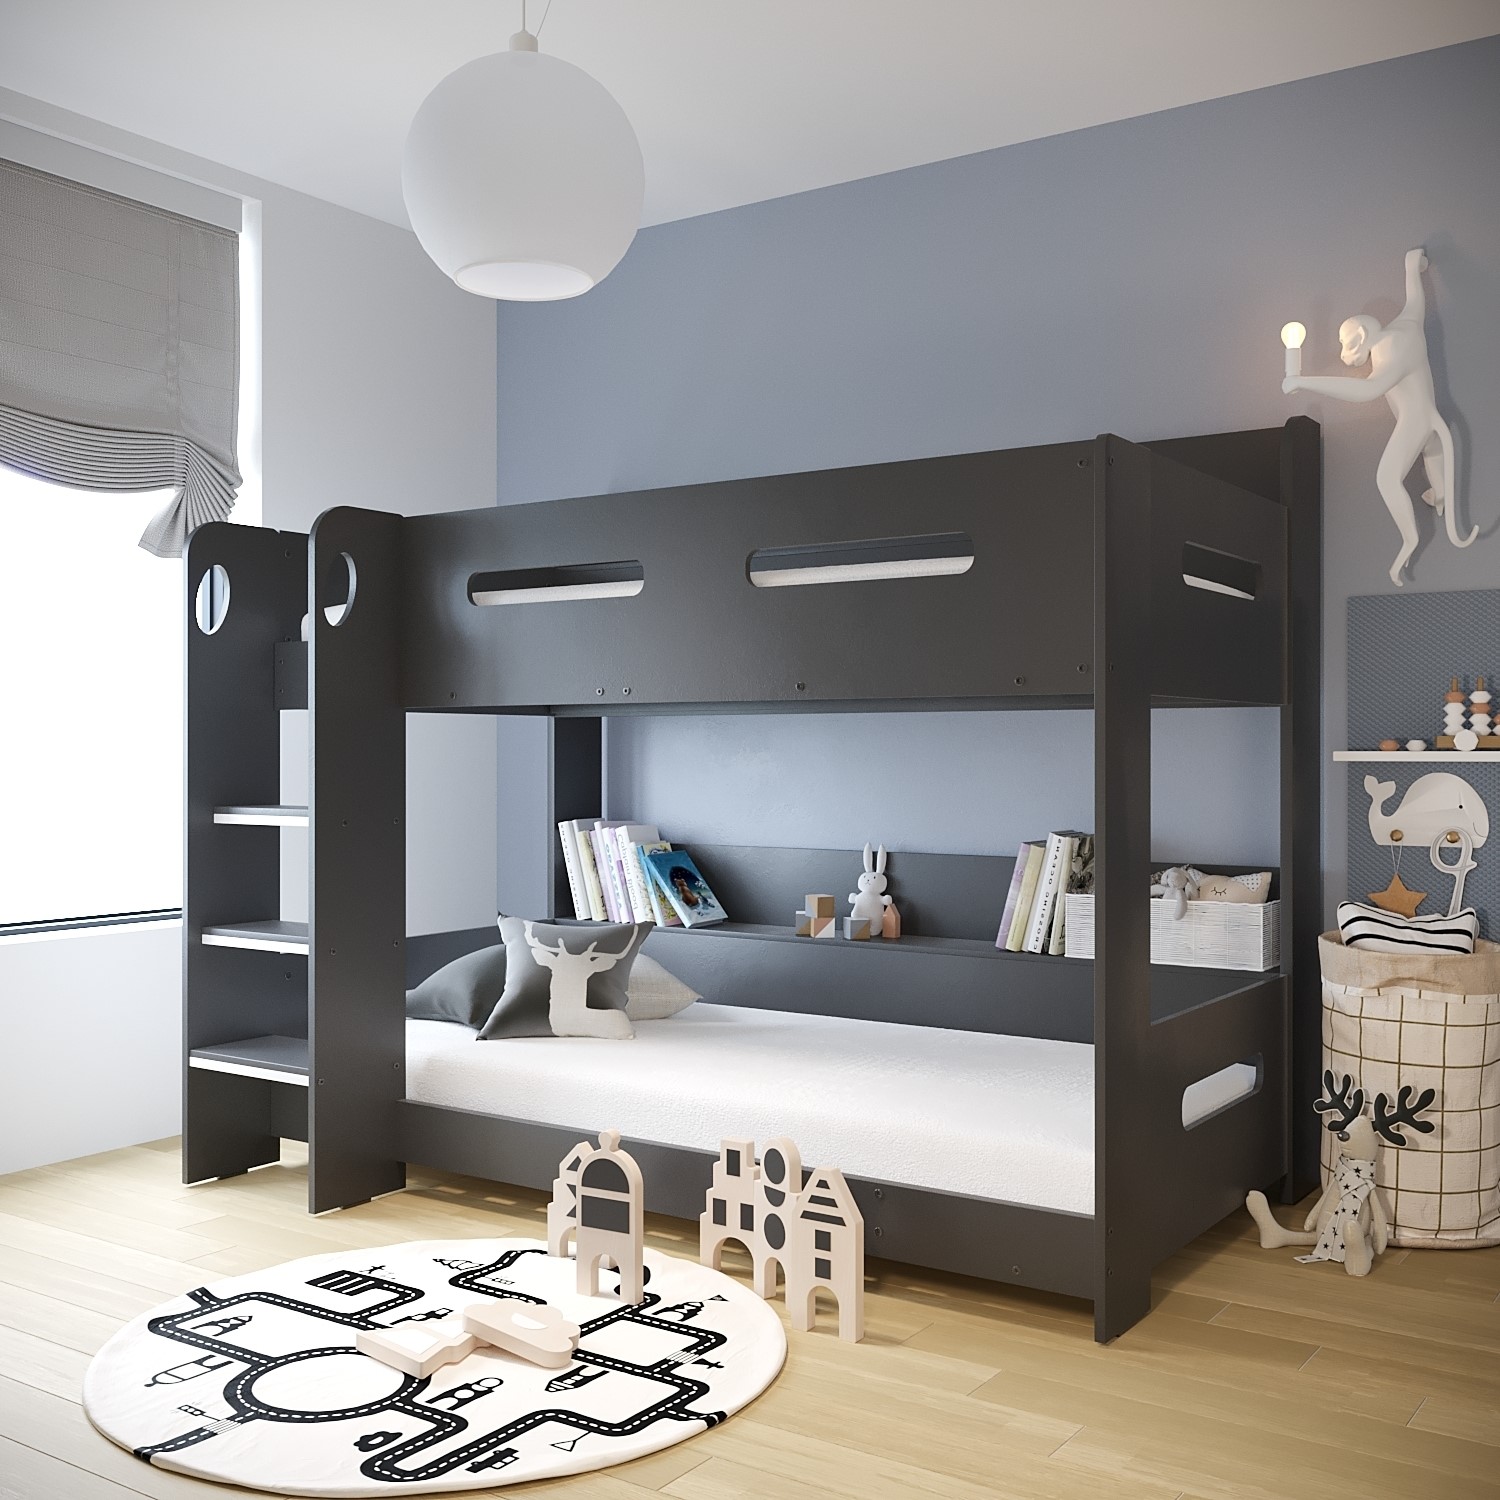 Photo of Dark grey bunk bed with storage shelves - ladder can be fitted either side